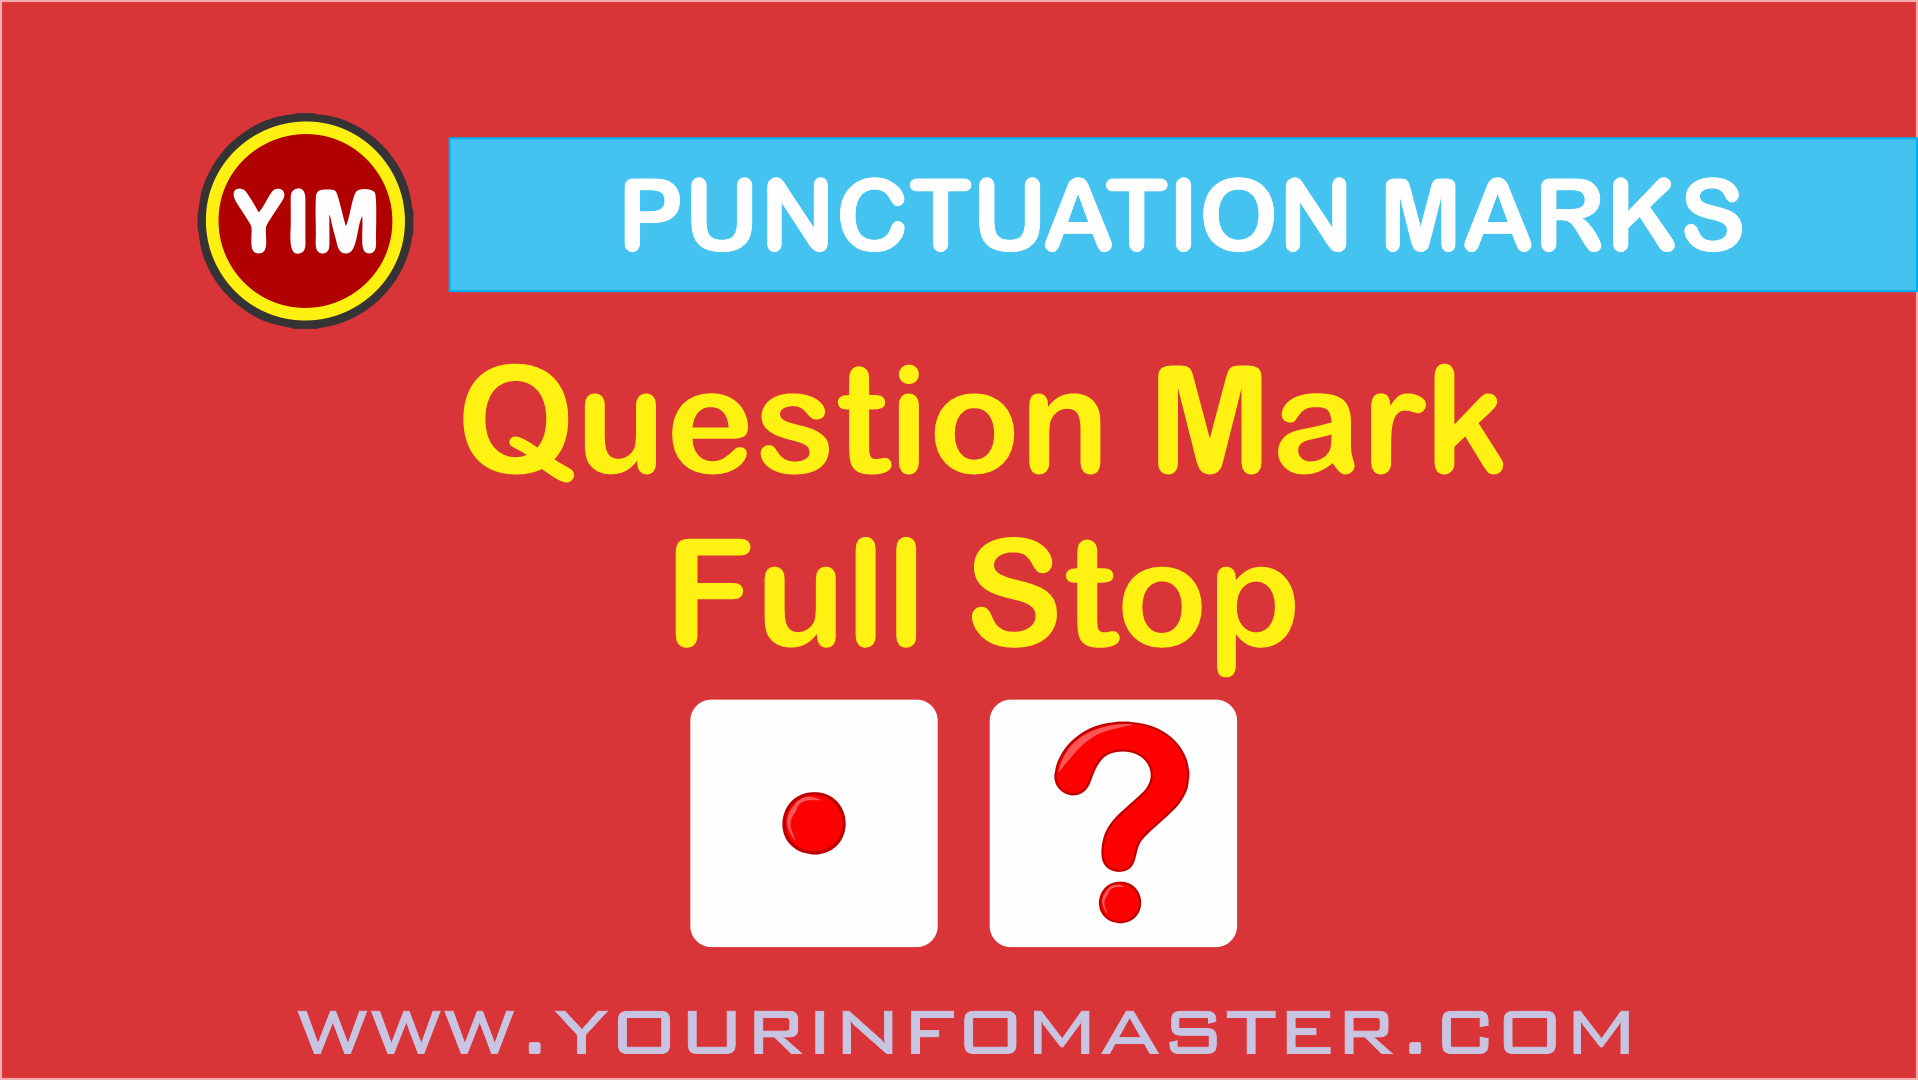 Punctuation marks, period, question mark, exclamation mark, english with lucy, english grammar, punctuation marks in english grammar, apostrophe, parentheses, quotation marks, upside down question mark, interrobang, colon punctuation, possessive apostrophe, apostrophe examples, upside down exclamation point, apostrophe meaning, apostrophe after s